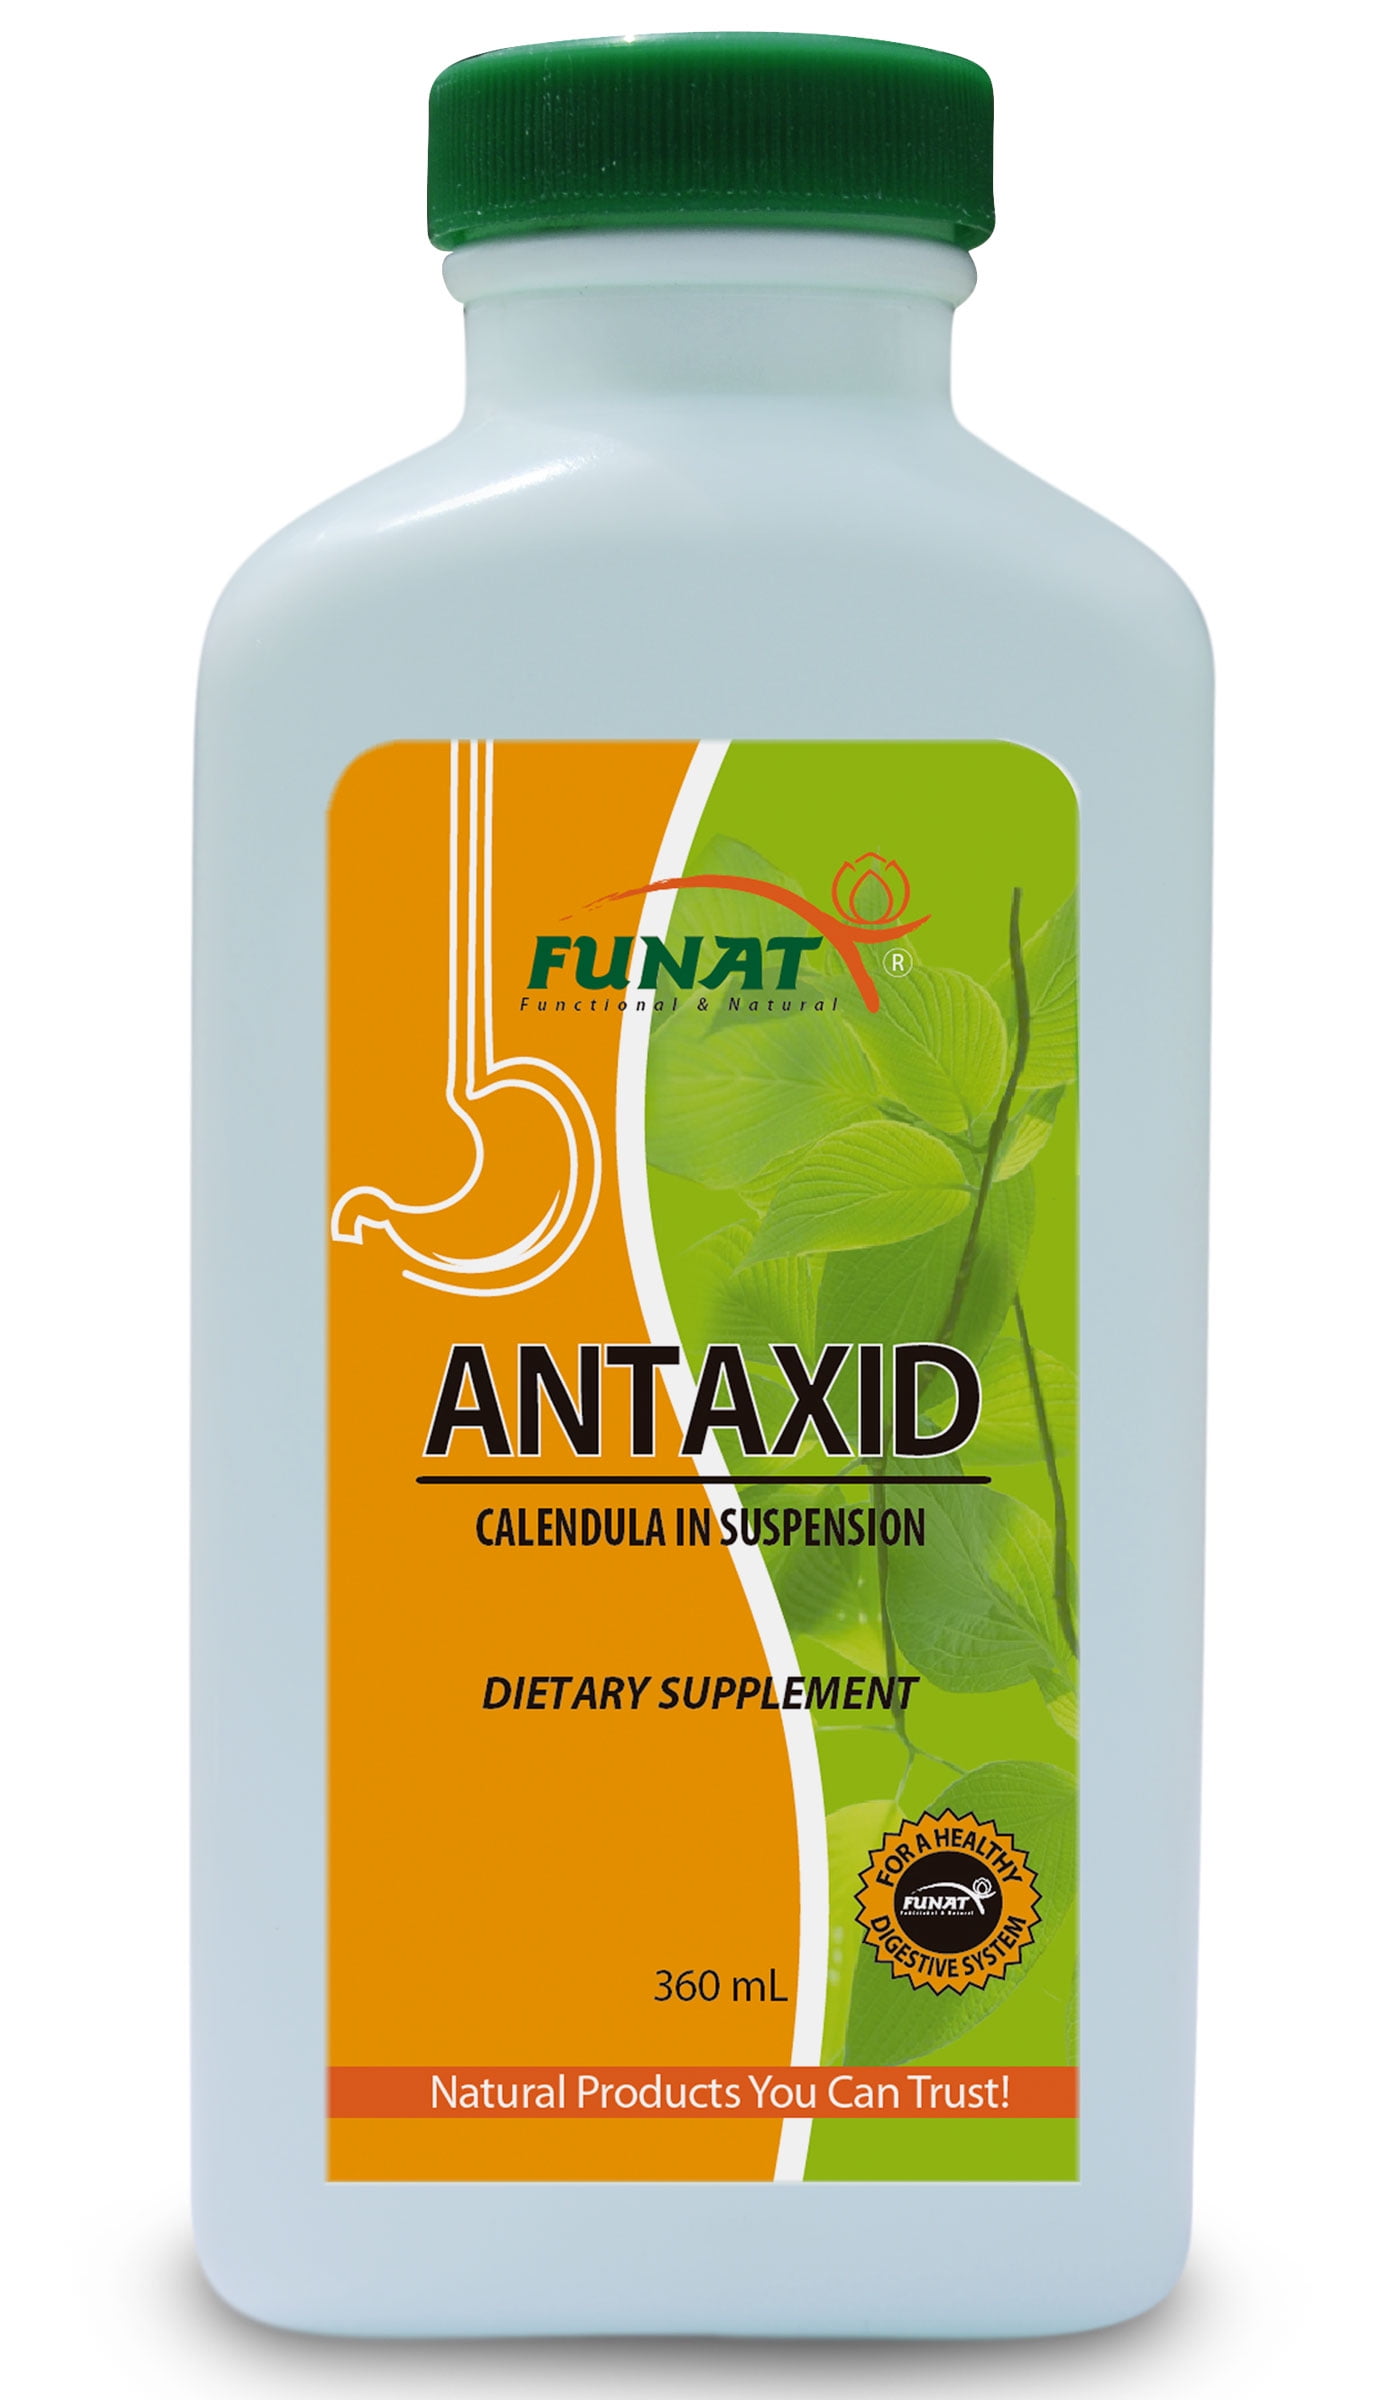 Funat Antaxid Gastritis And Upset Stomach Relief With Calendula